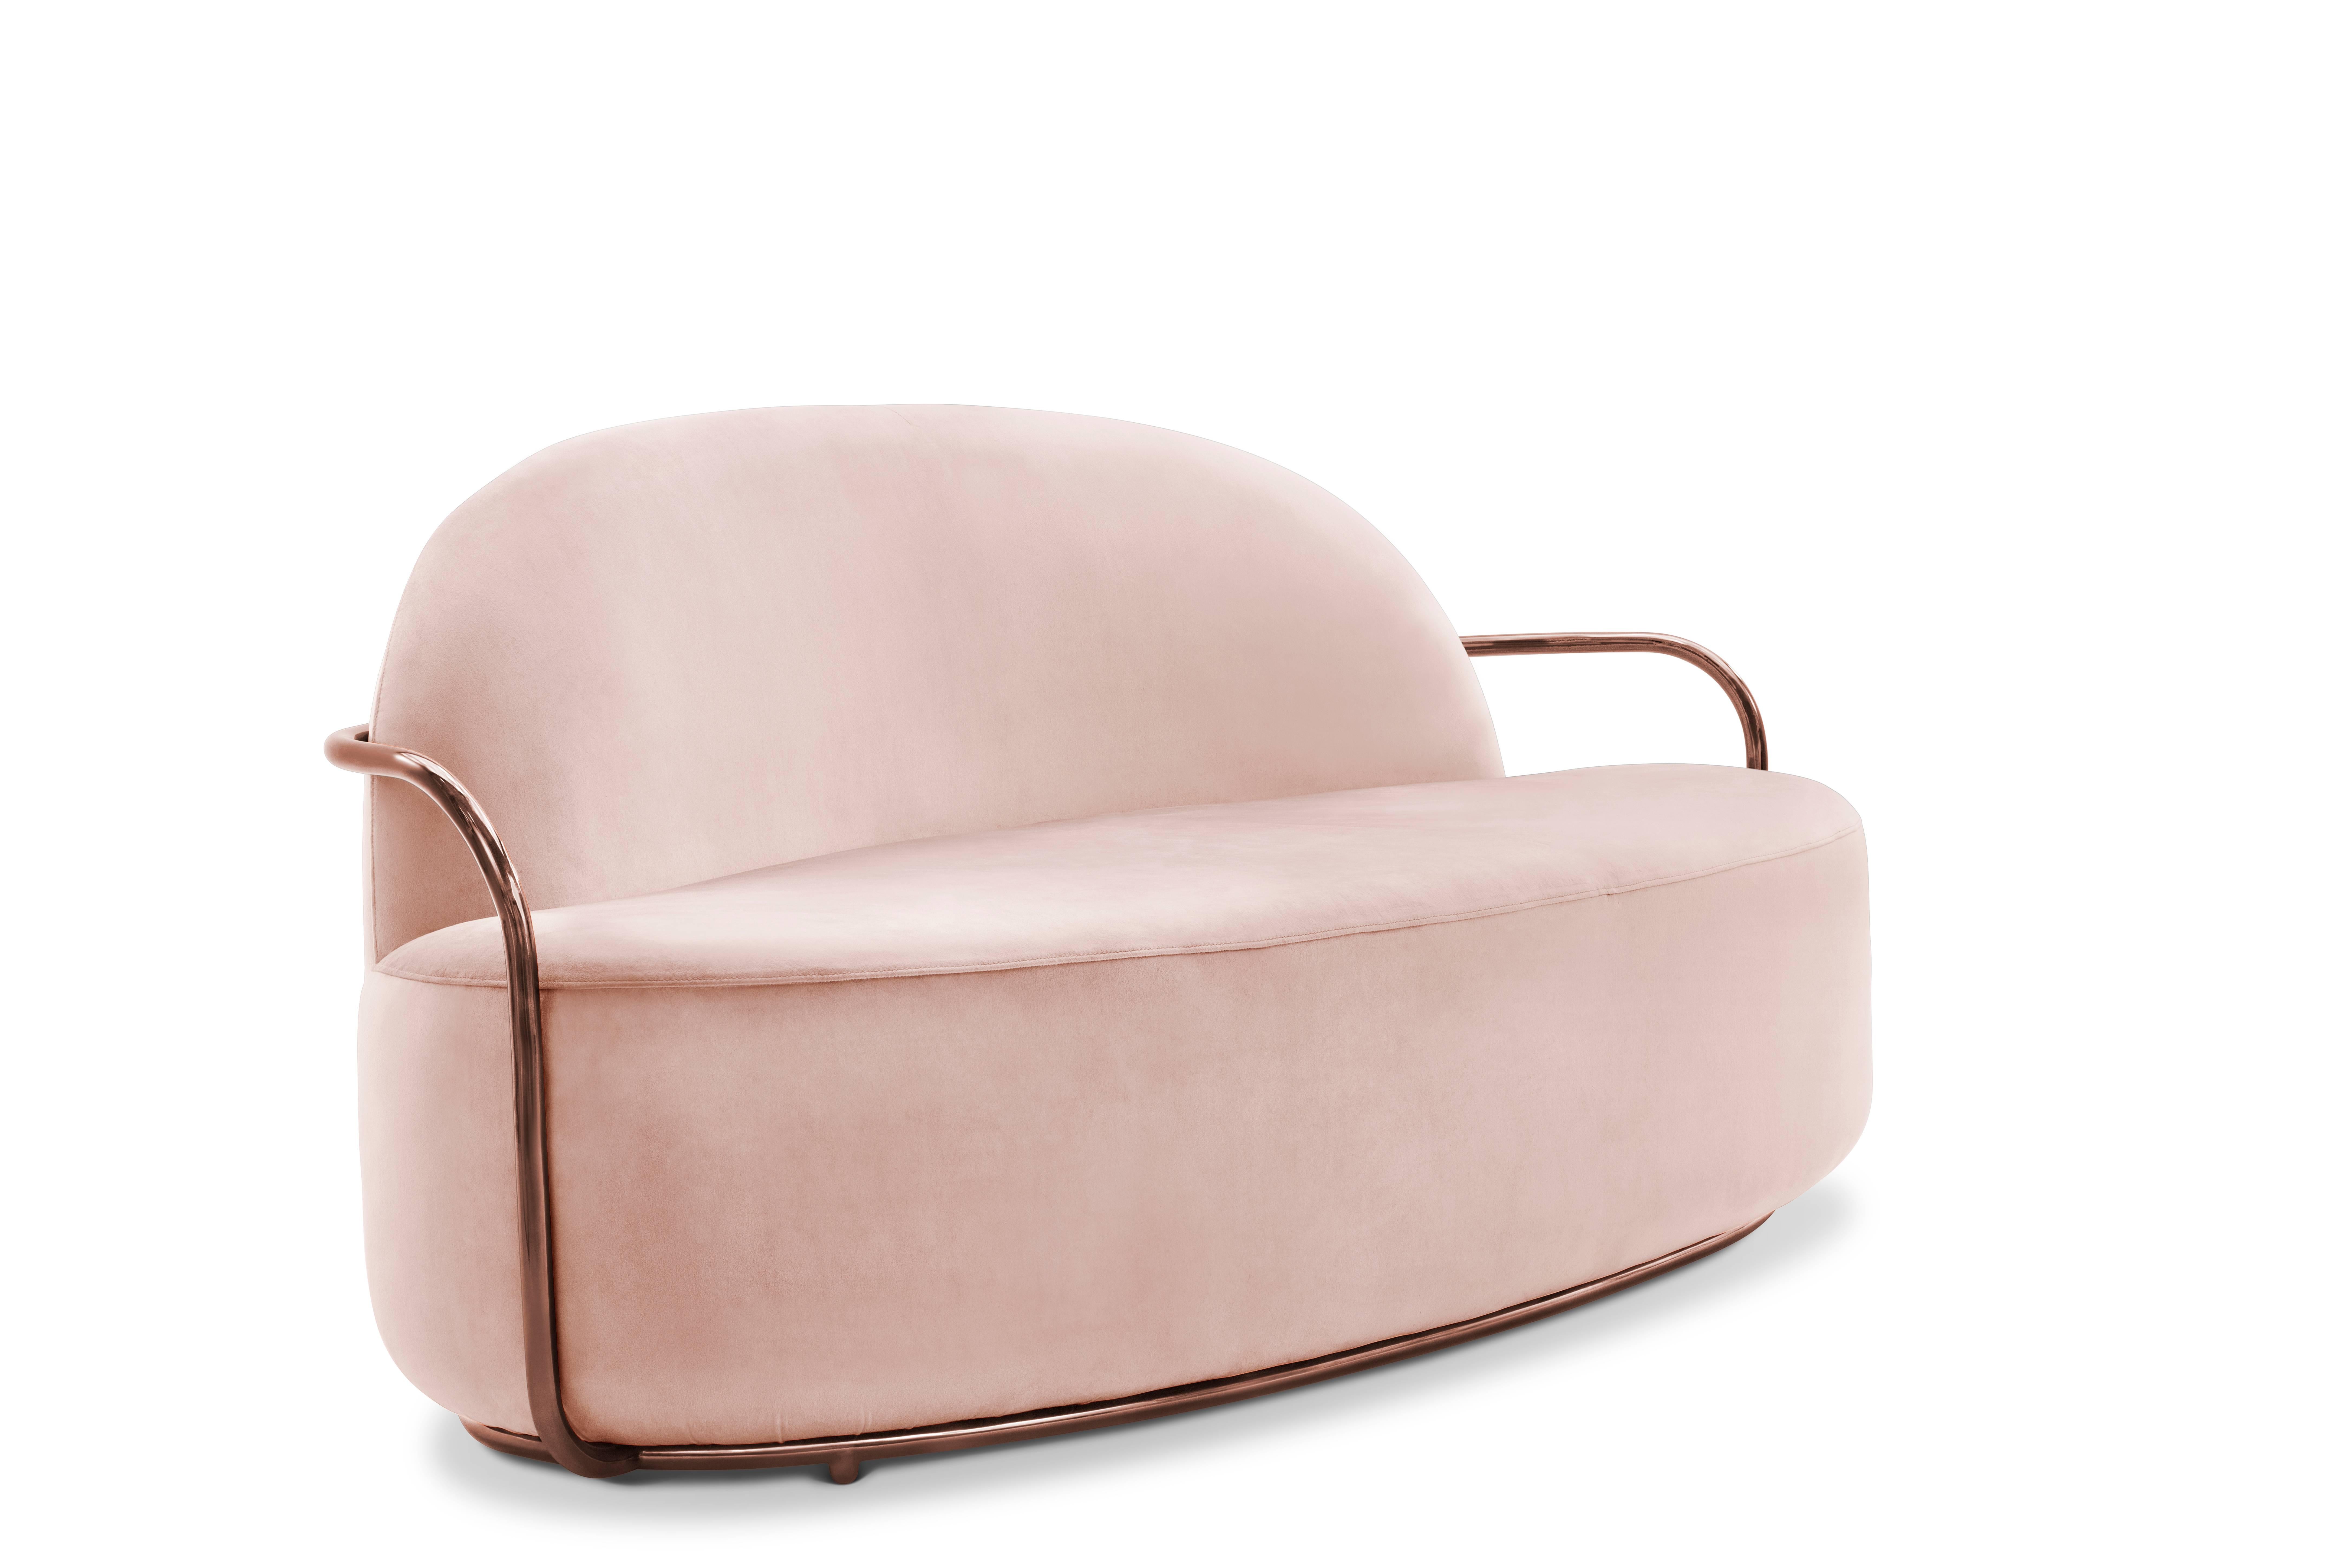 Orion sofa blush rose by Nika Zupanc for Scarlet Splendour

The 88 constellations of the universe mysterious and magical, holding a promise to guide our destinies. Little wonder that they are the muse for the 88 Secrets, Nika Zupanc’s debut